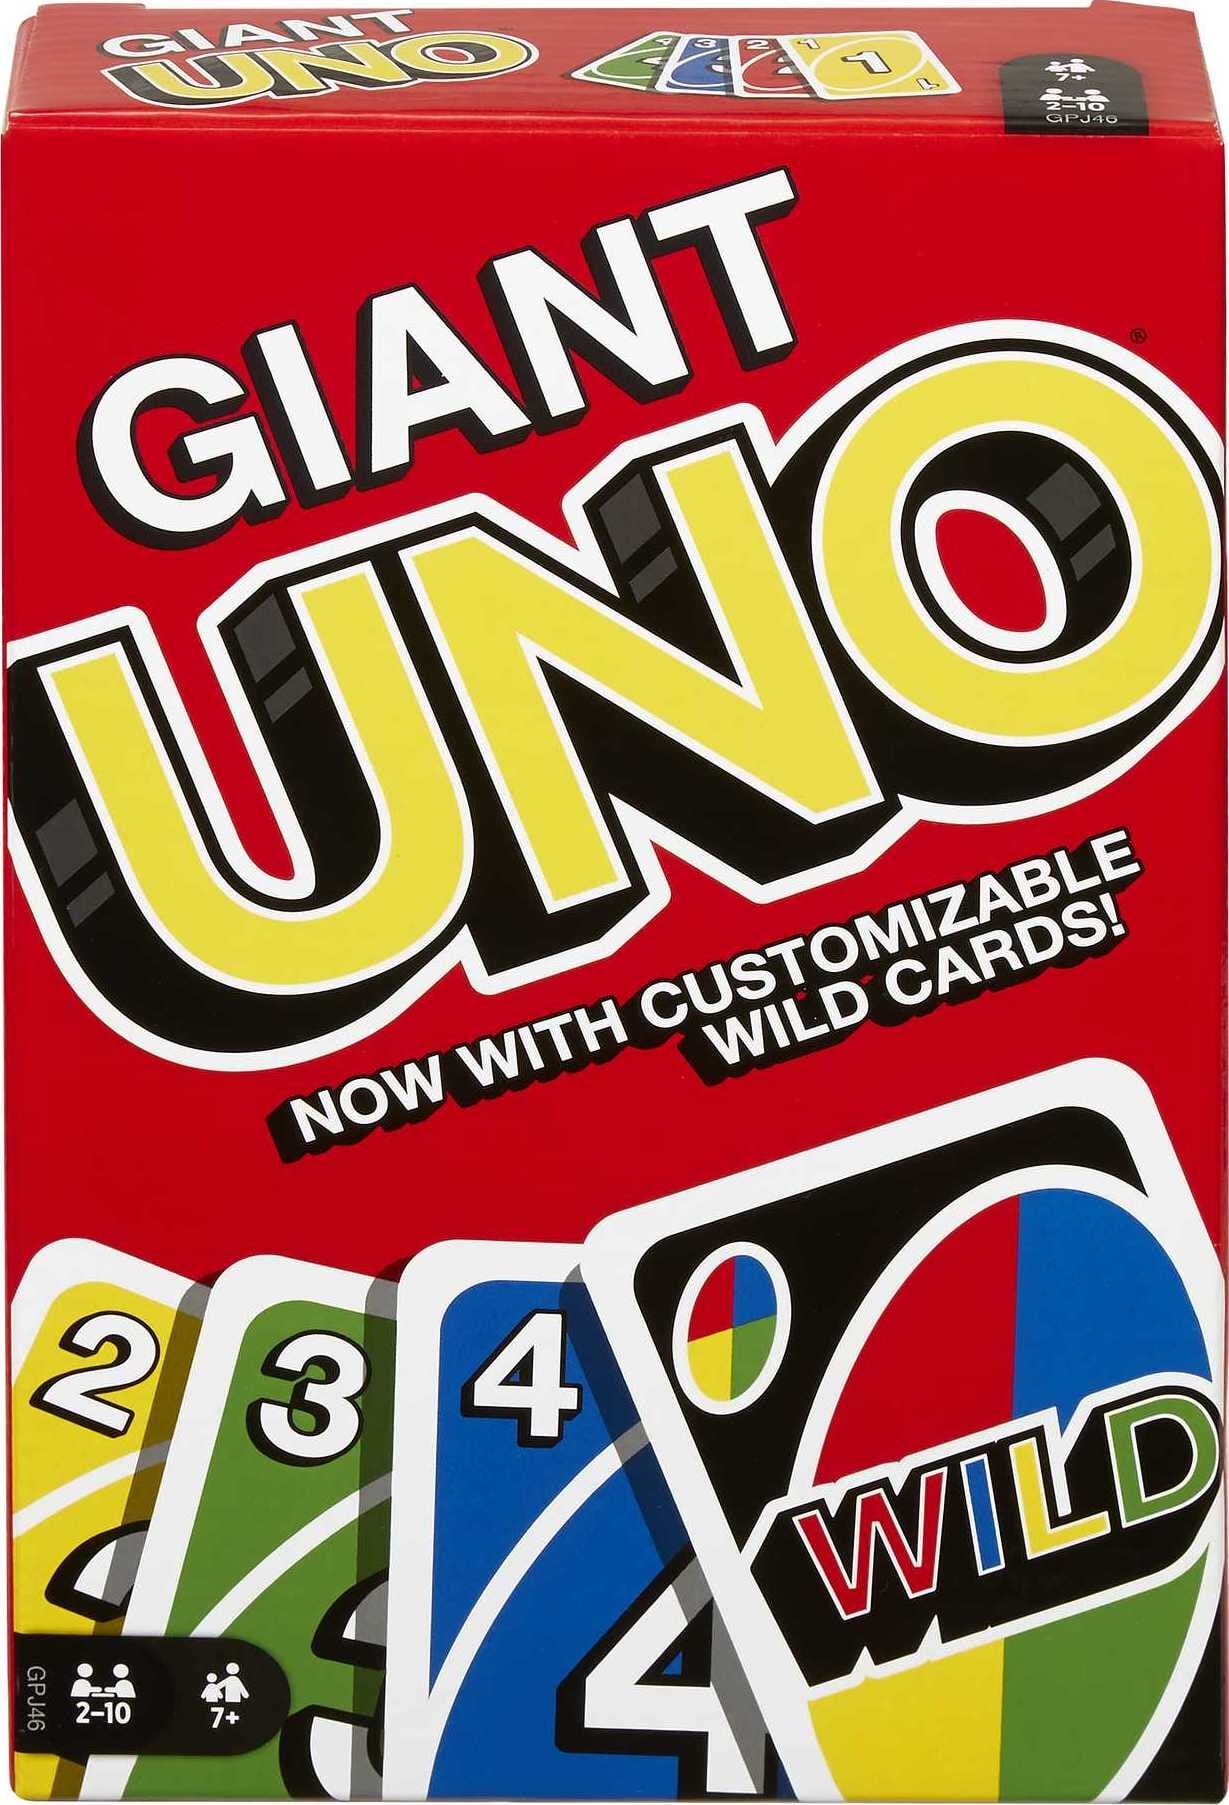 Giant UNO Complete Cardinal Games Family Game Night 7 for sale online 